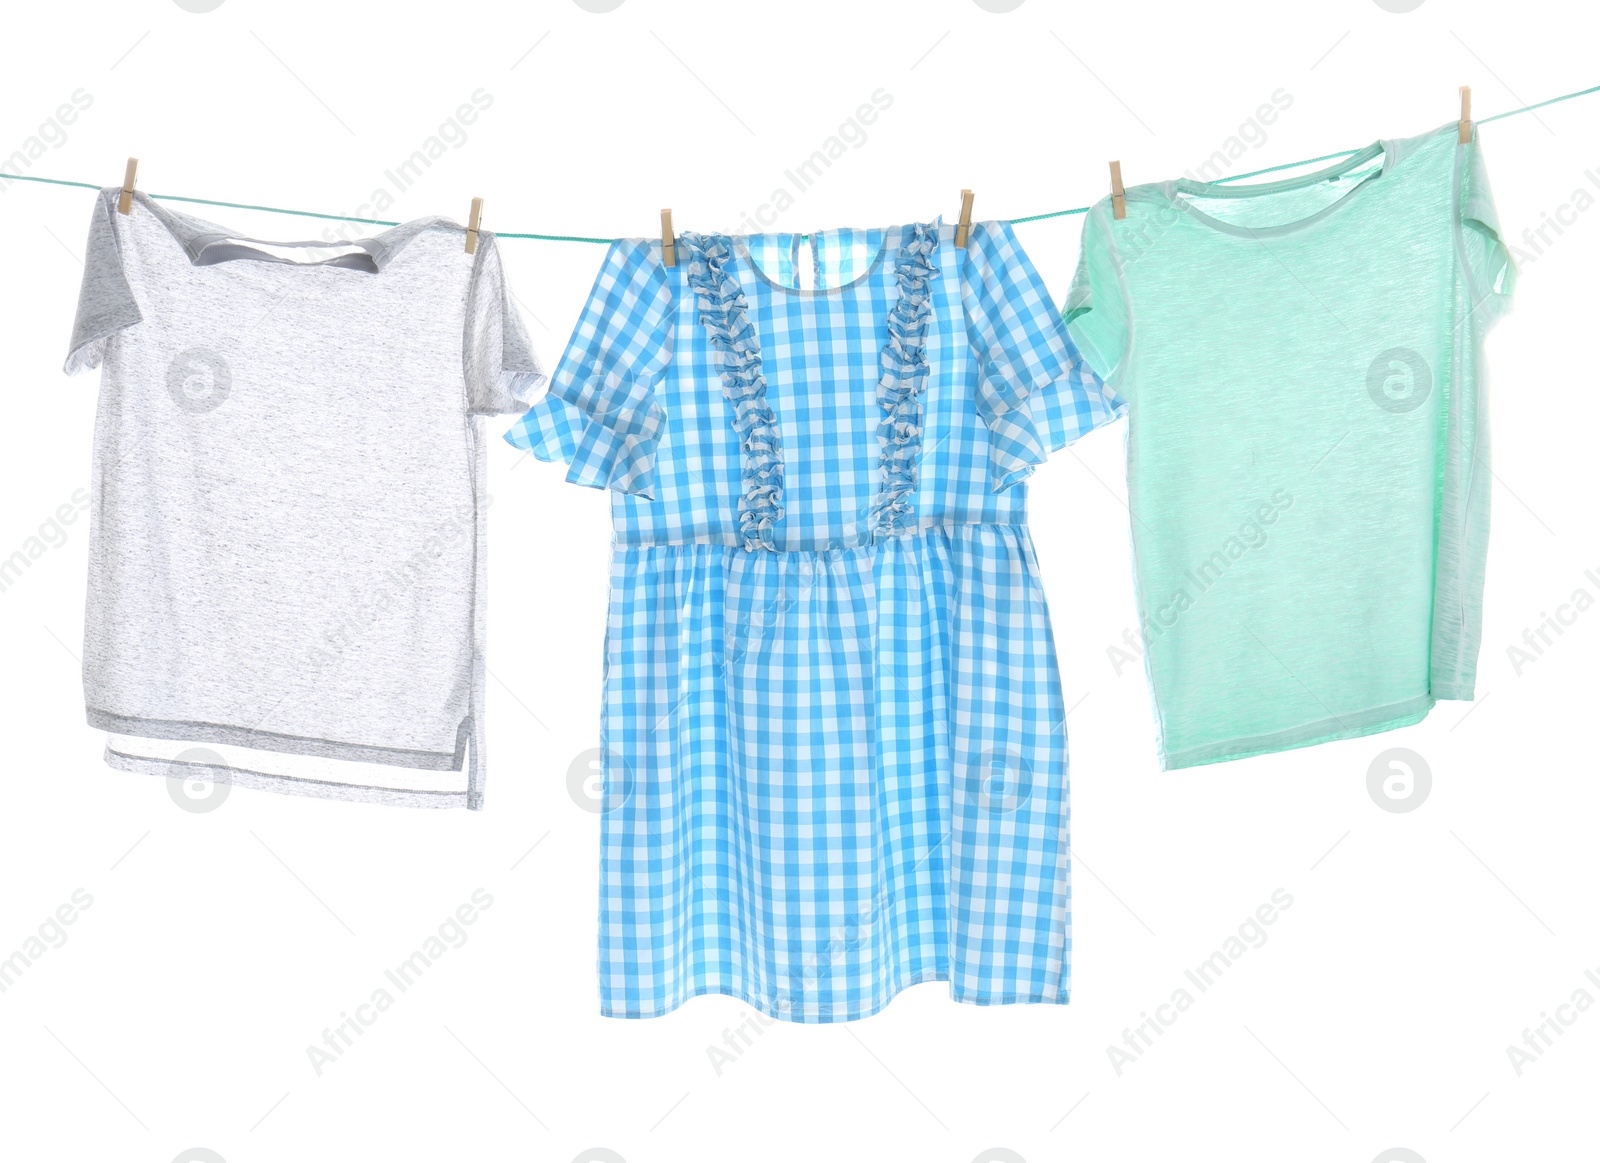 Photo of Clothes on laundry line against white background